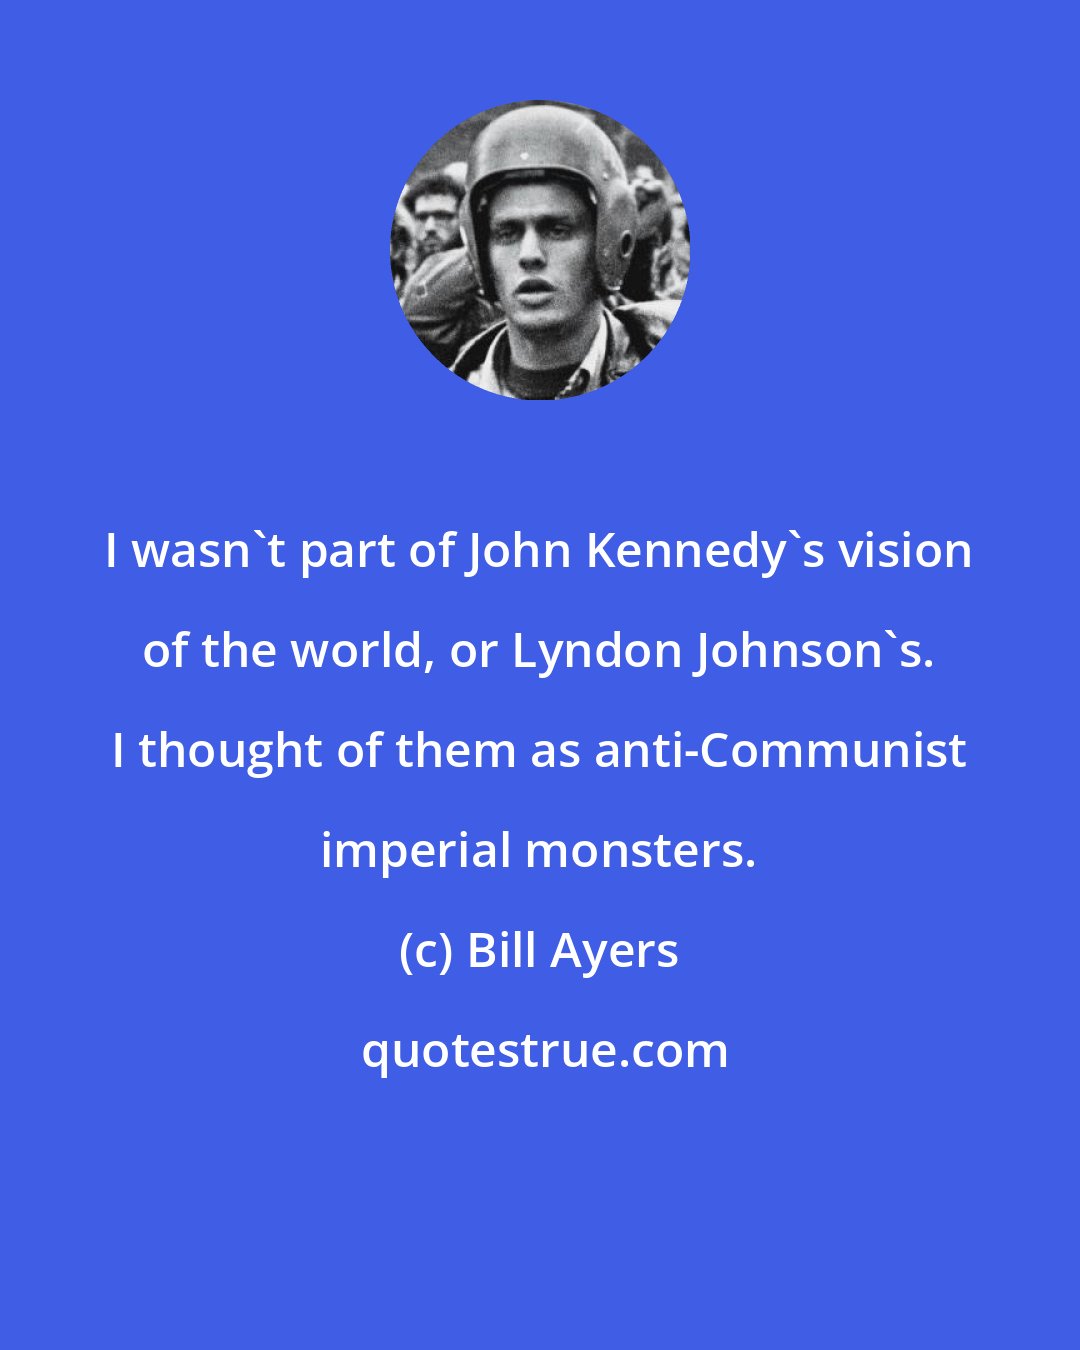 Bill Ayers: I wasn't part of John Kennedy's vision of the world, or Lyndon Johnson's. I thought of them as anti-Communist imperial monsters.